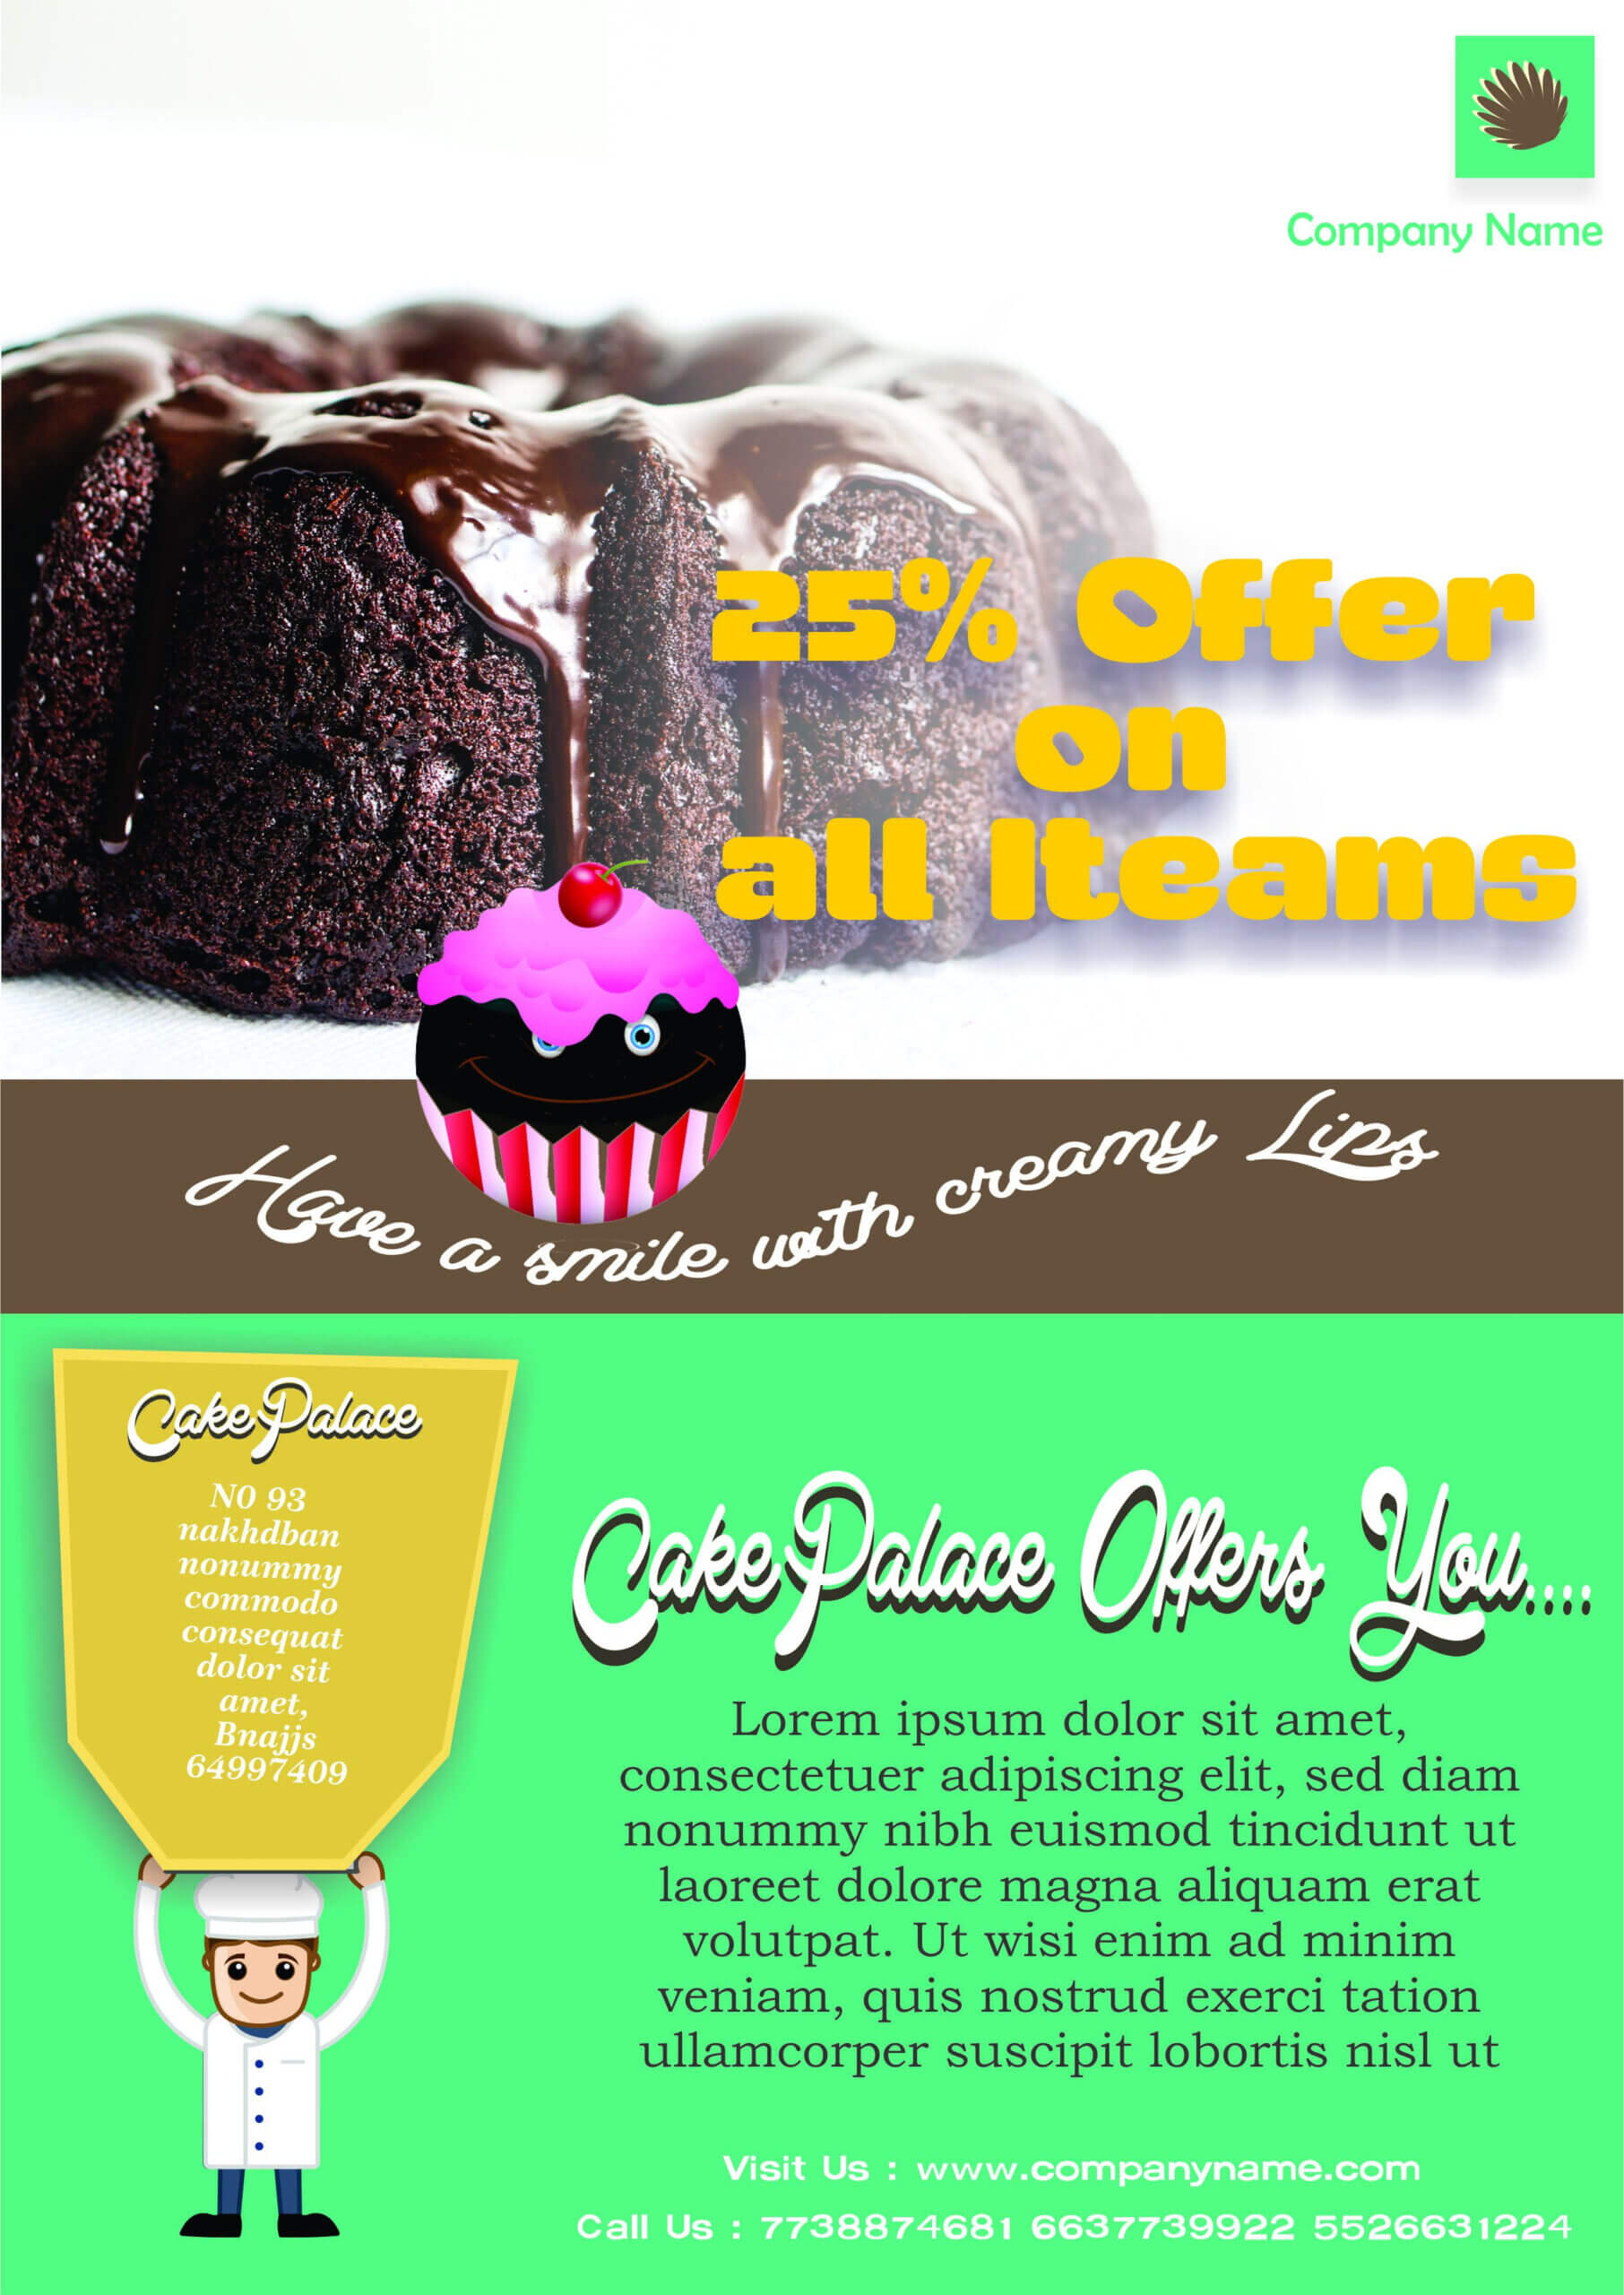 Engaging Free Bake Sale Flyer Templates For Fundraising Regarding Bake Sale Flyer Template Free